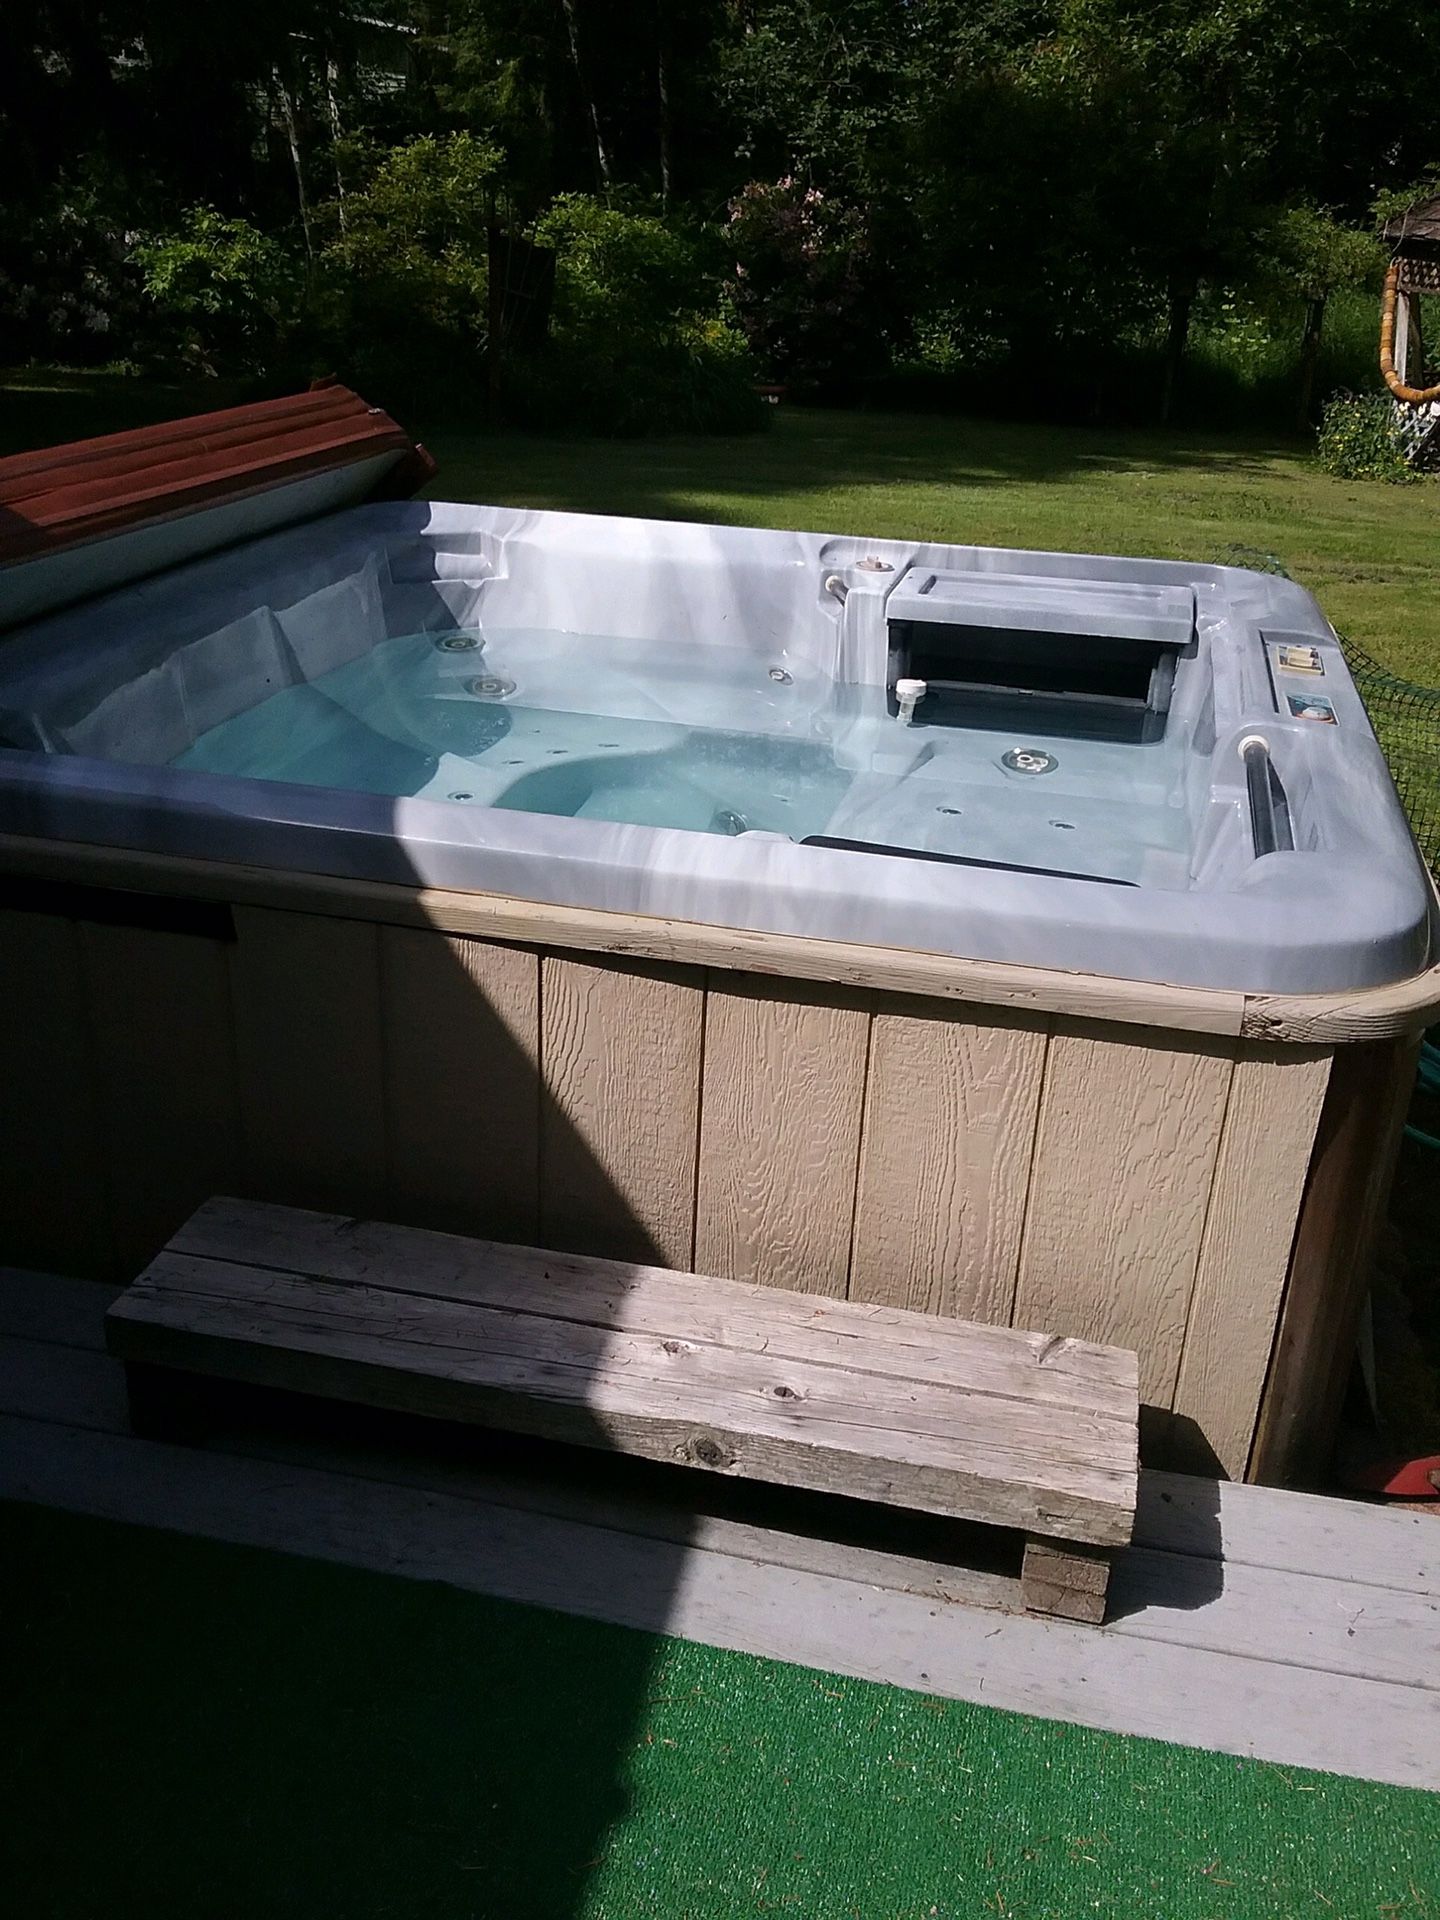 Sundance hot tub free was working last year but needs electrical connector fixed to work